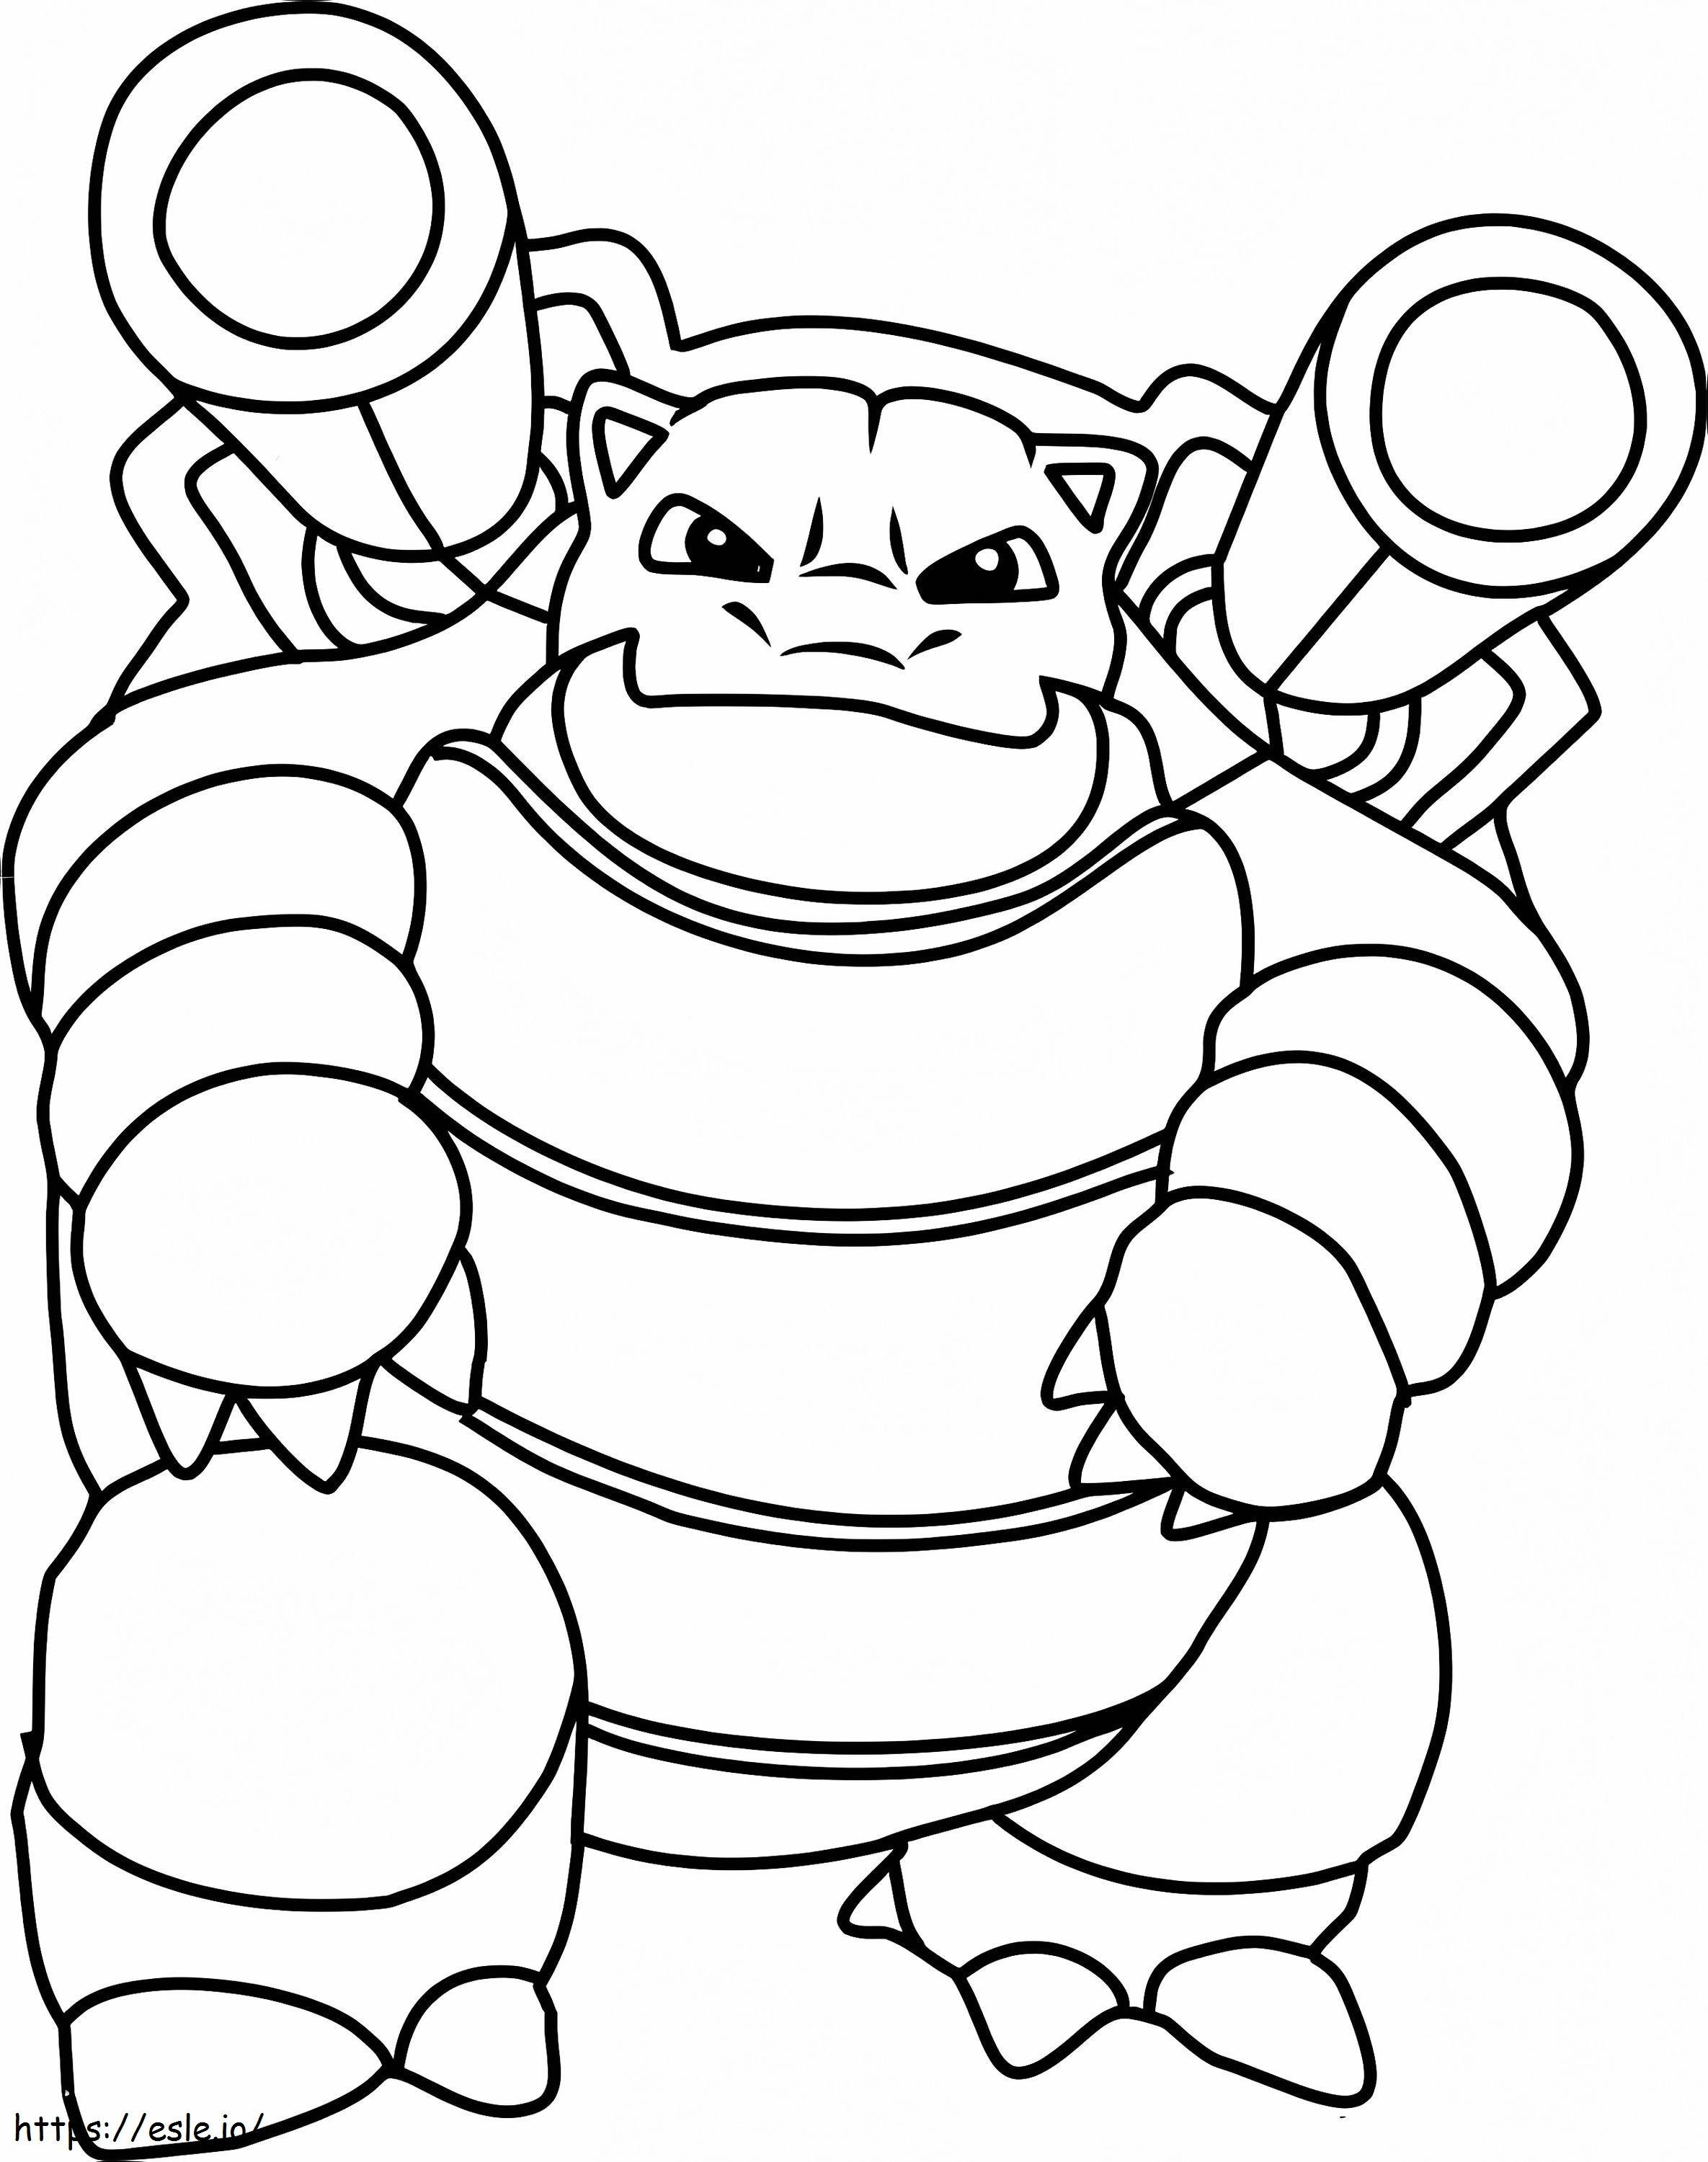 Blastoise 2 coloring page